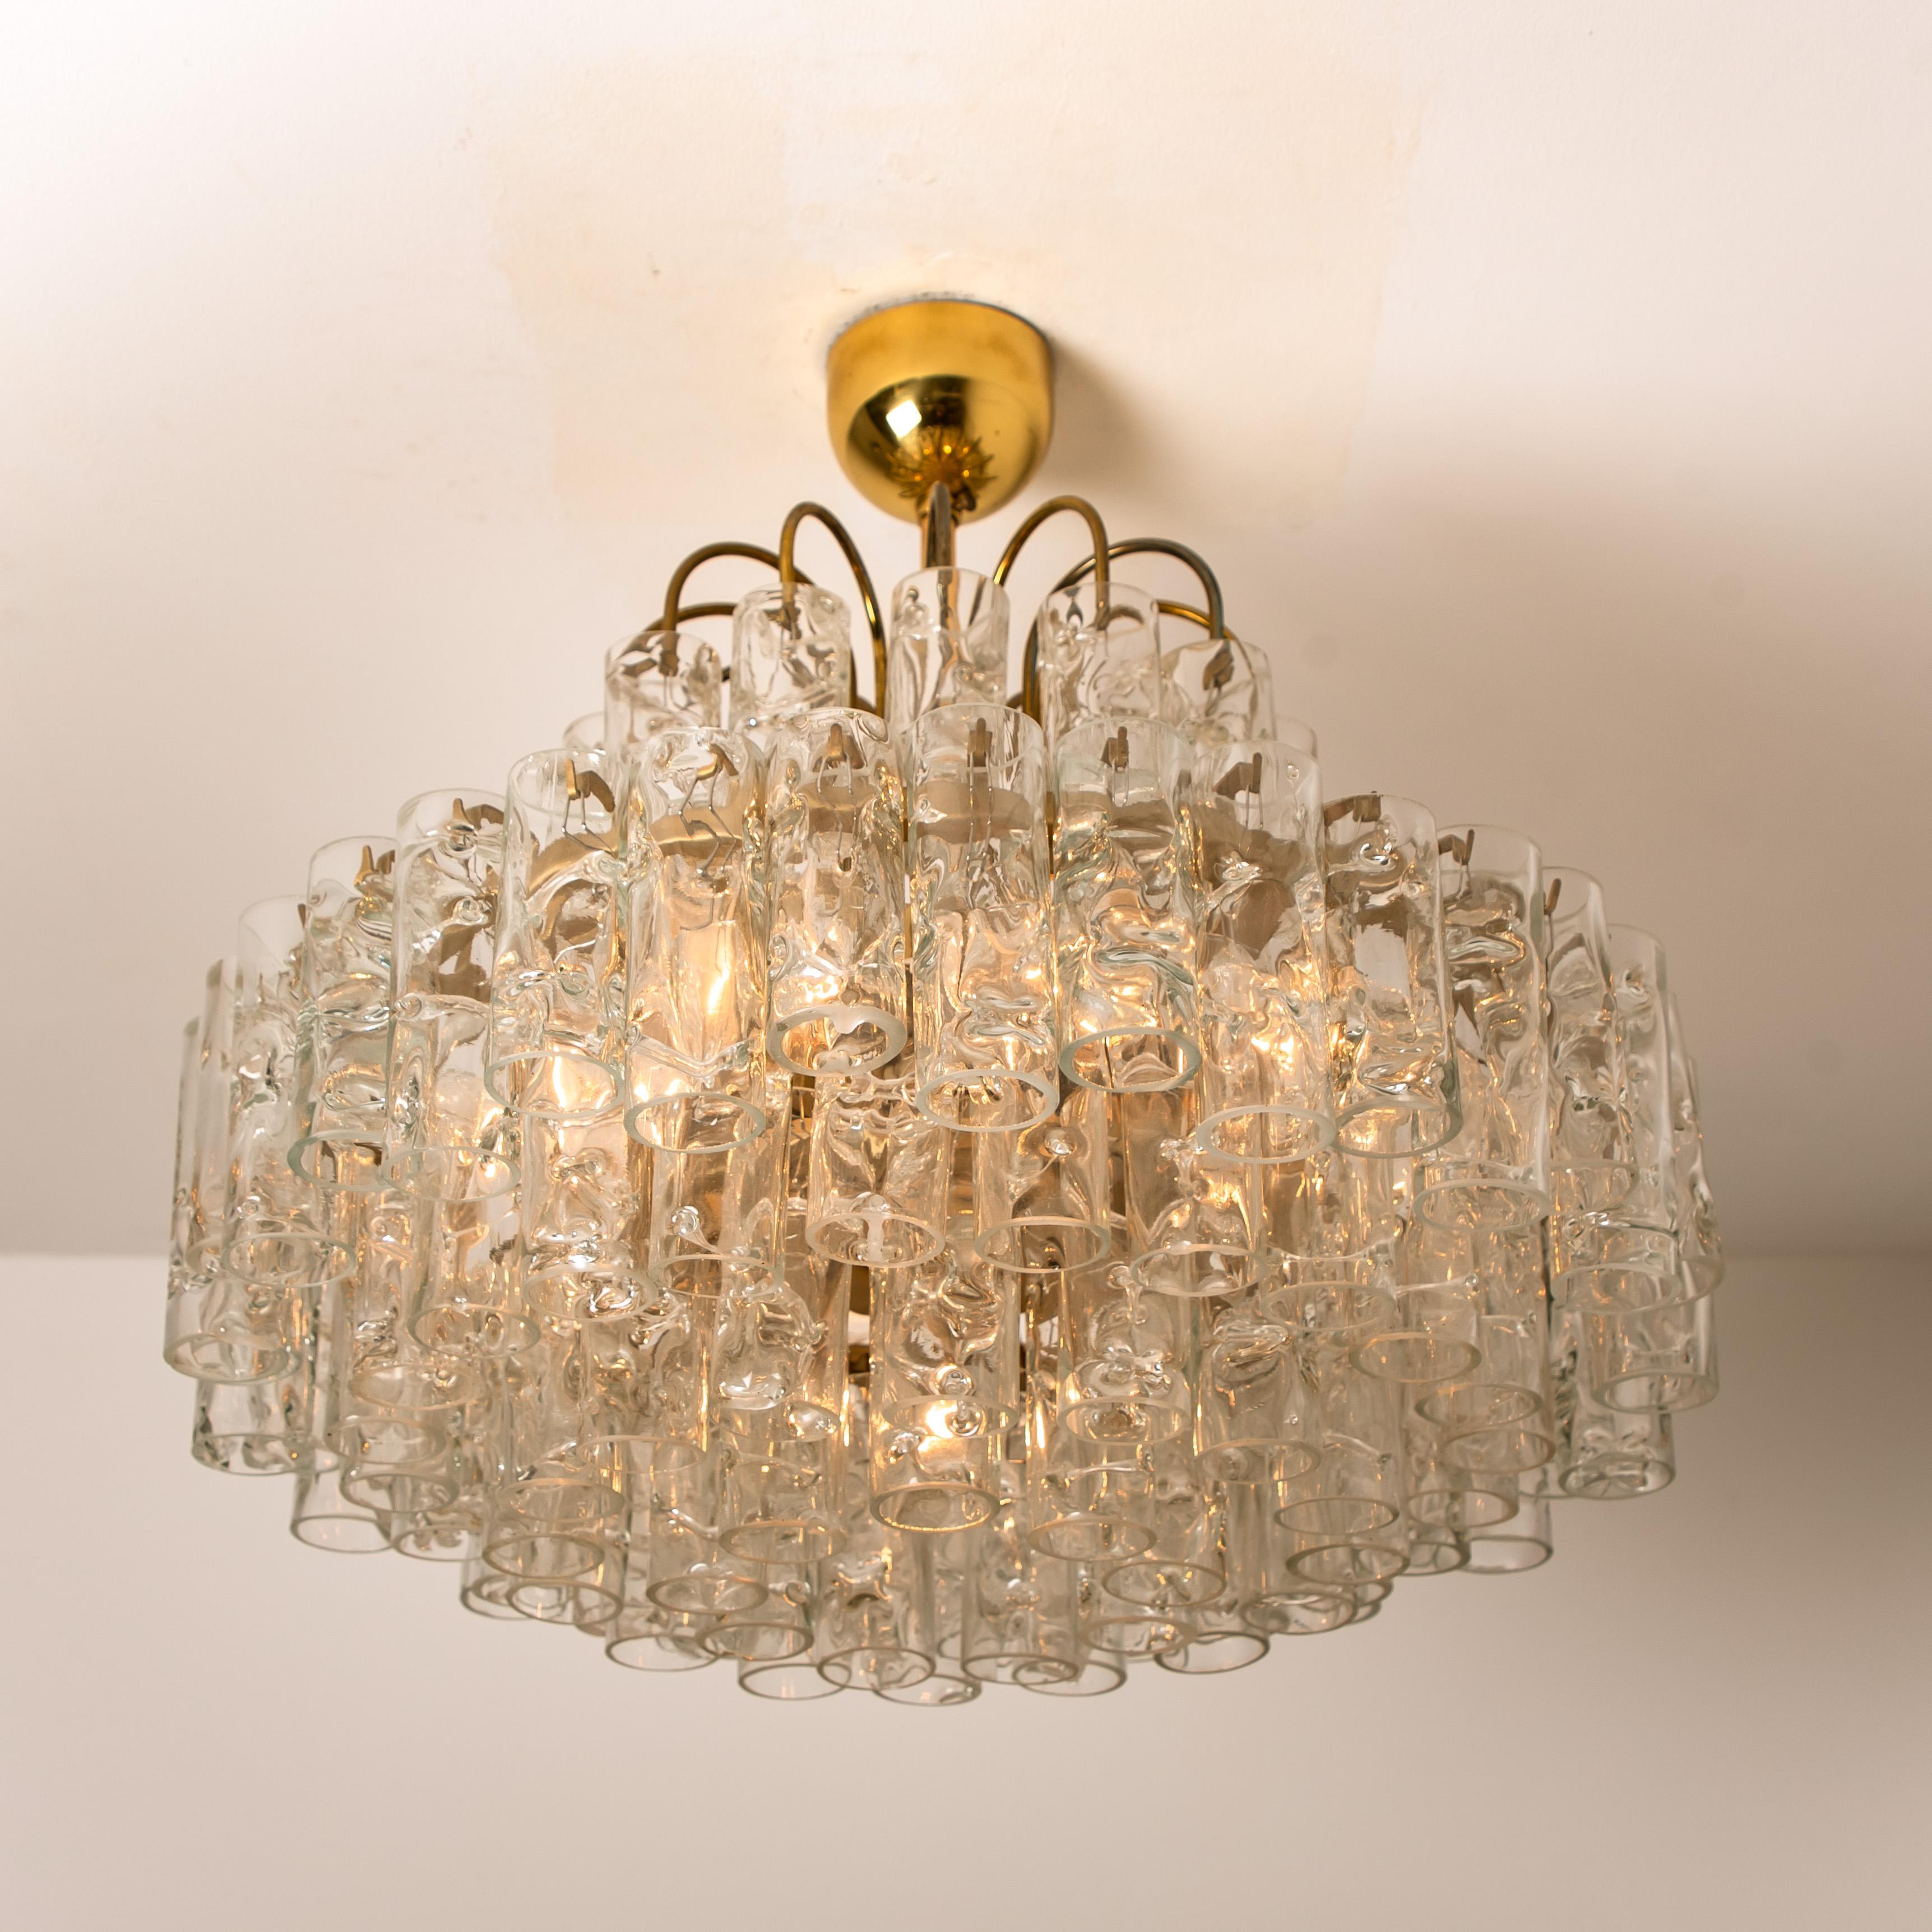 A gorgeous hand blown ice glass chandelier from the manufactory Doria, with several ice glass tubes in different lengths, a brass-plated frame, top design from the 1960s. The ice glass tubes beautifully reflecting the light.

Measures: Diameter